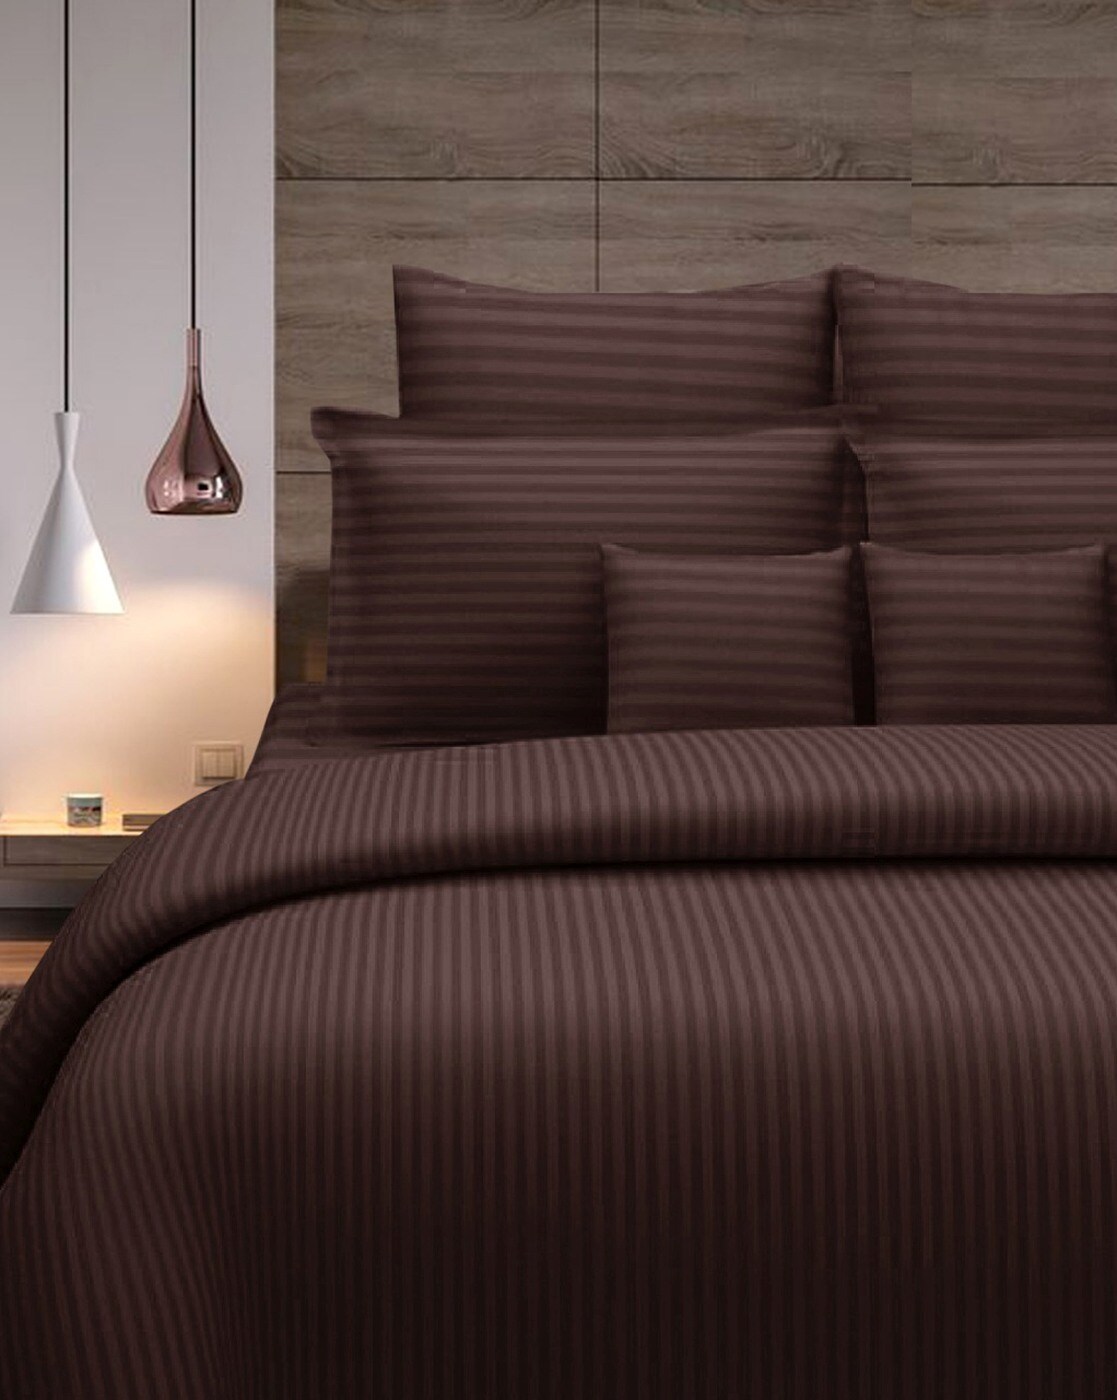 Trance Home Linen, Chocolate Brown King Duvet Cover